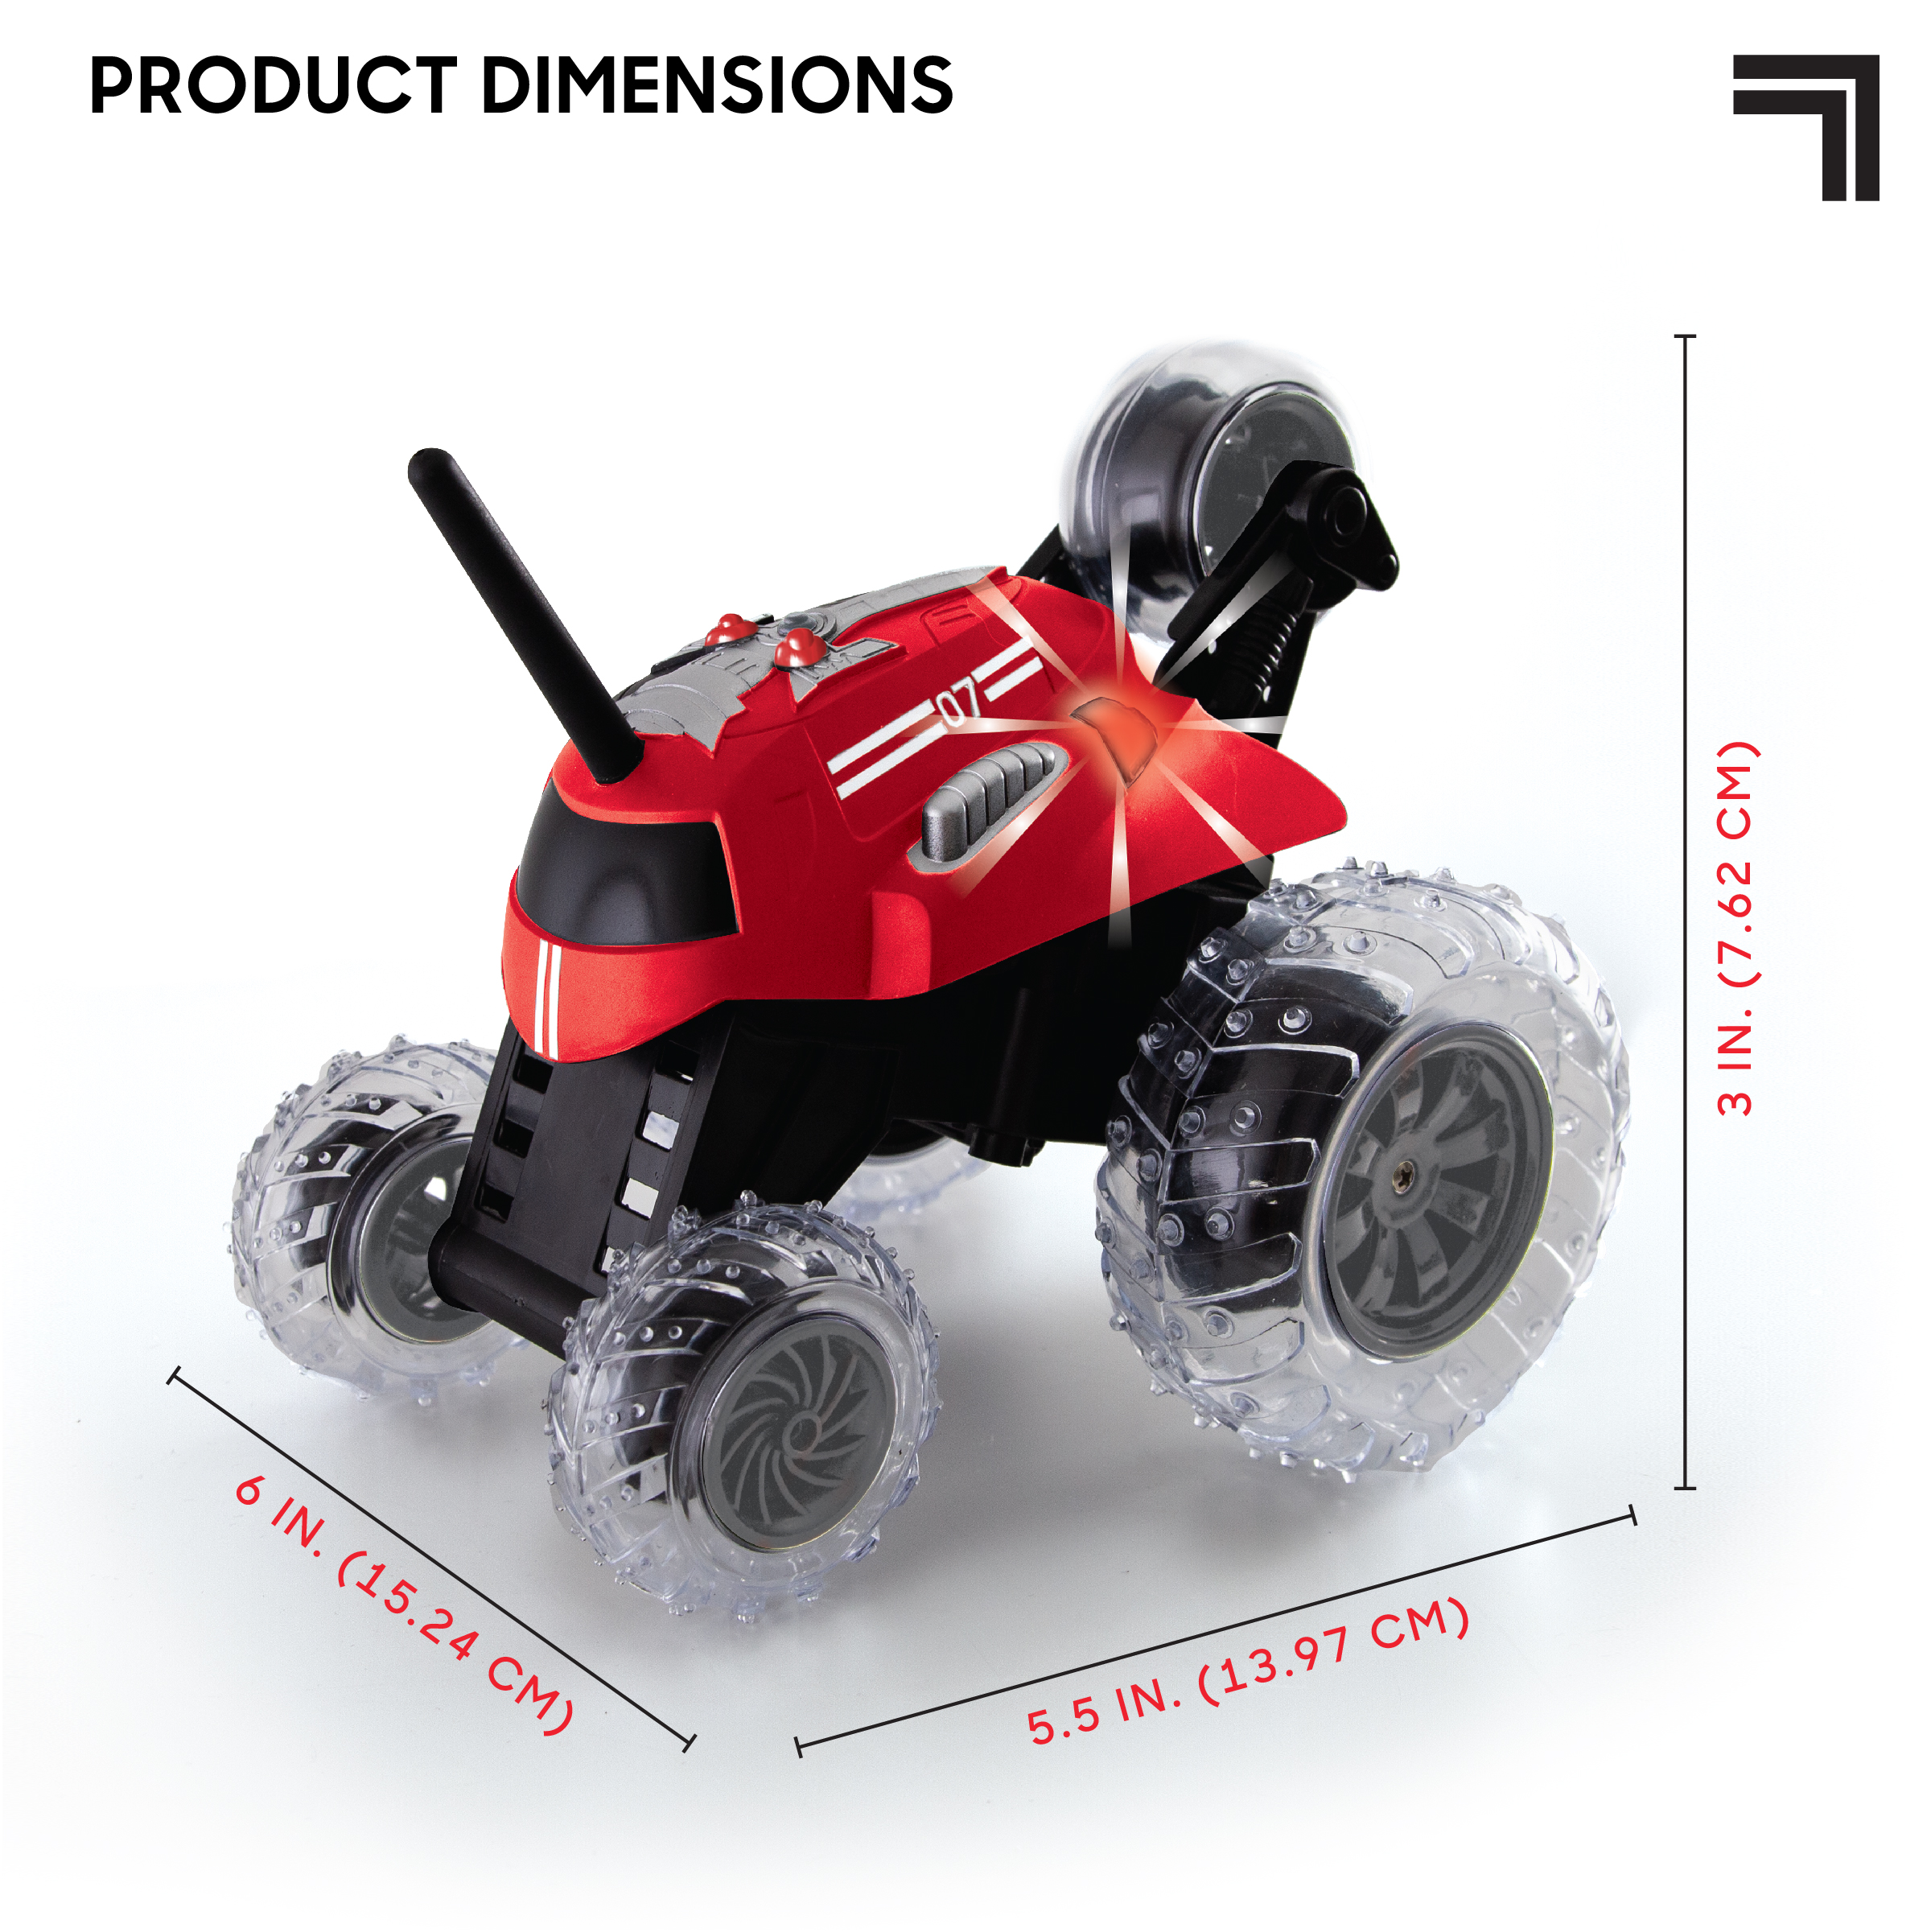 SHARPER IMAGE Thunder Tumbler Toy RC Car for Kids, Remote Control Monster Spinning Stunt Mini Truck for Girls and Boys, Racing Flips and Tricks with 5th Wheel, 49 MHz Black - image 8 of 14